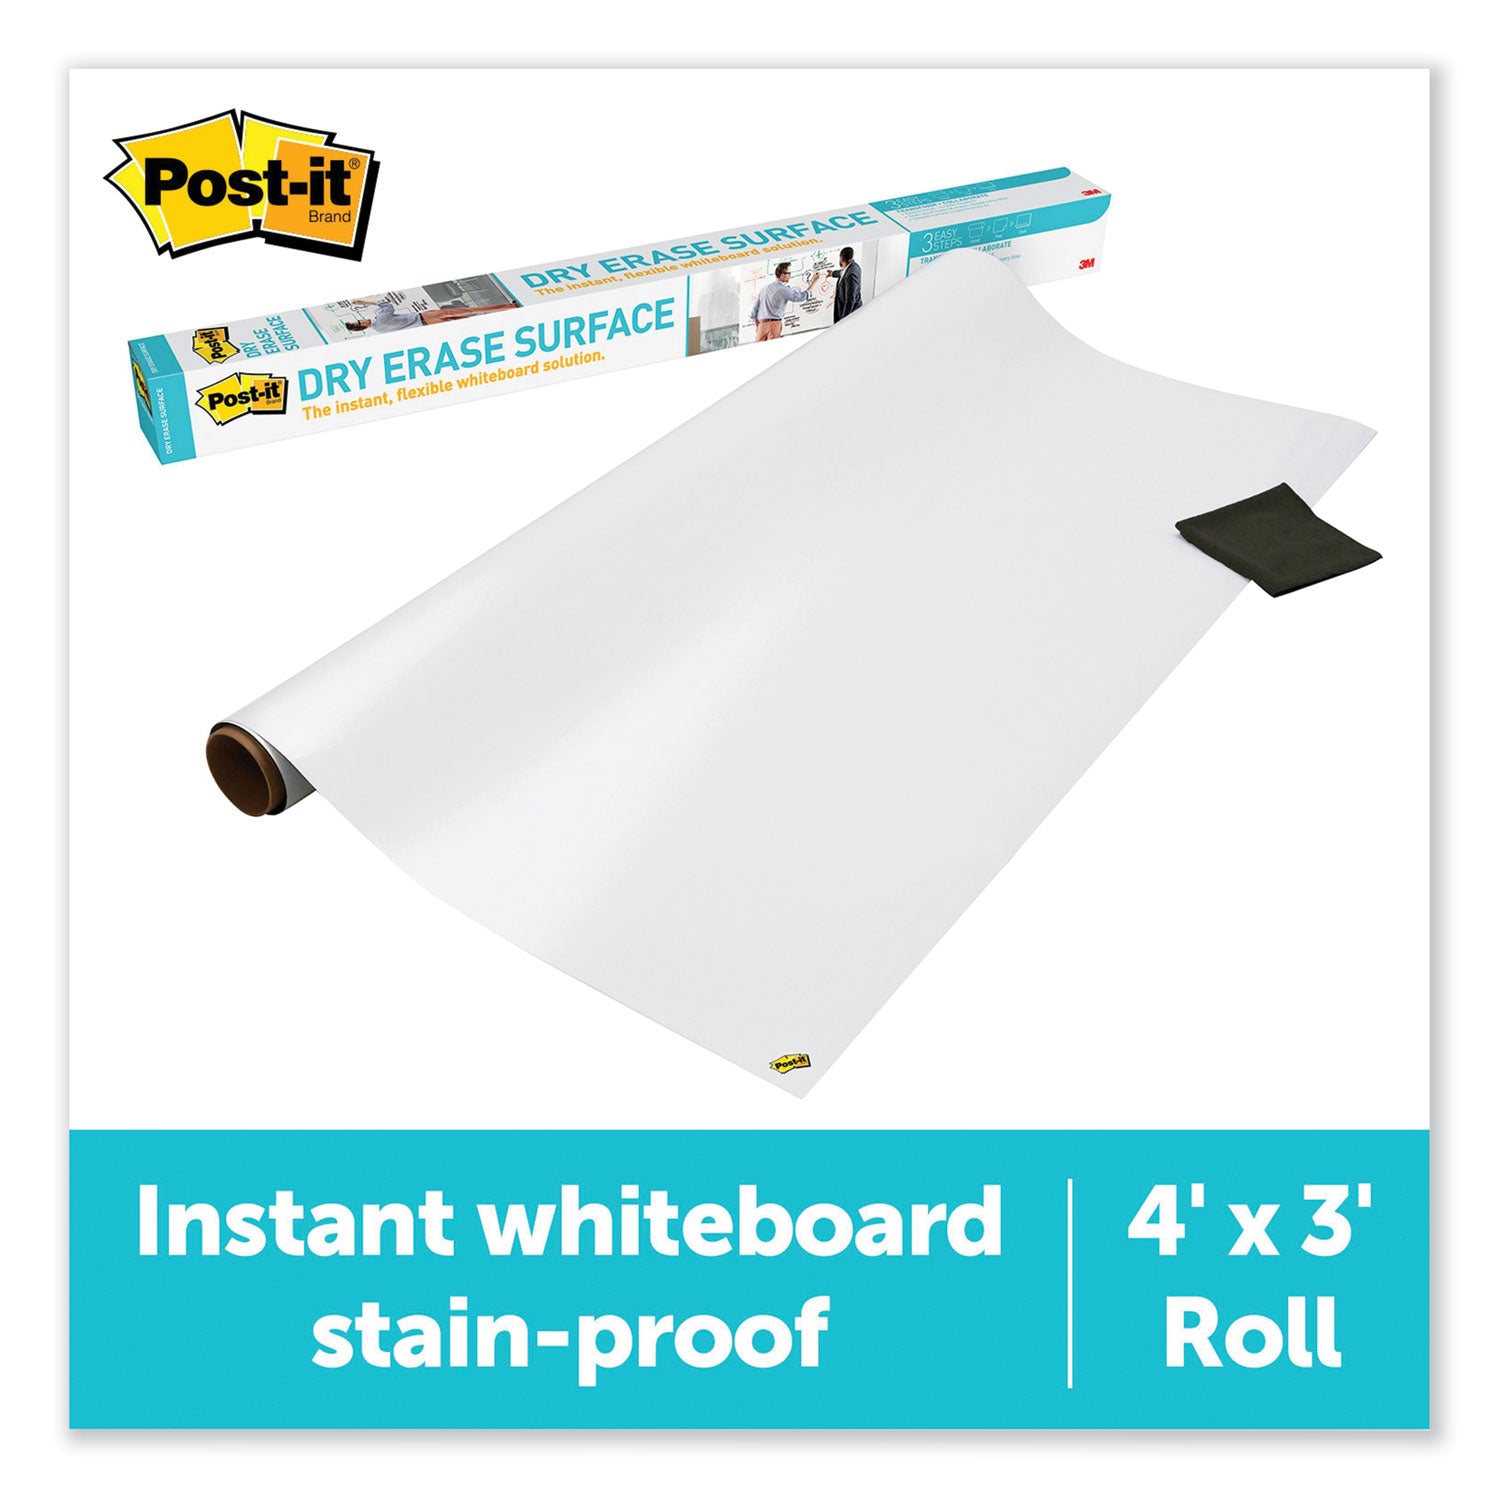 Dry Erase Surface with Adhesive Backing, 48 x 36, White Surface - 